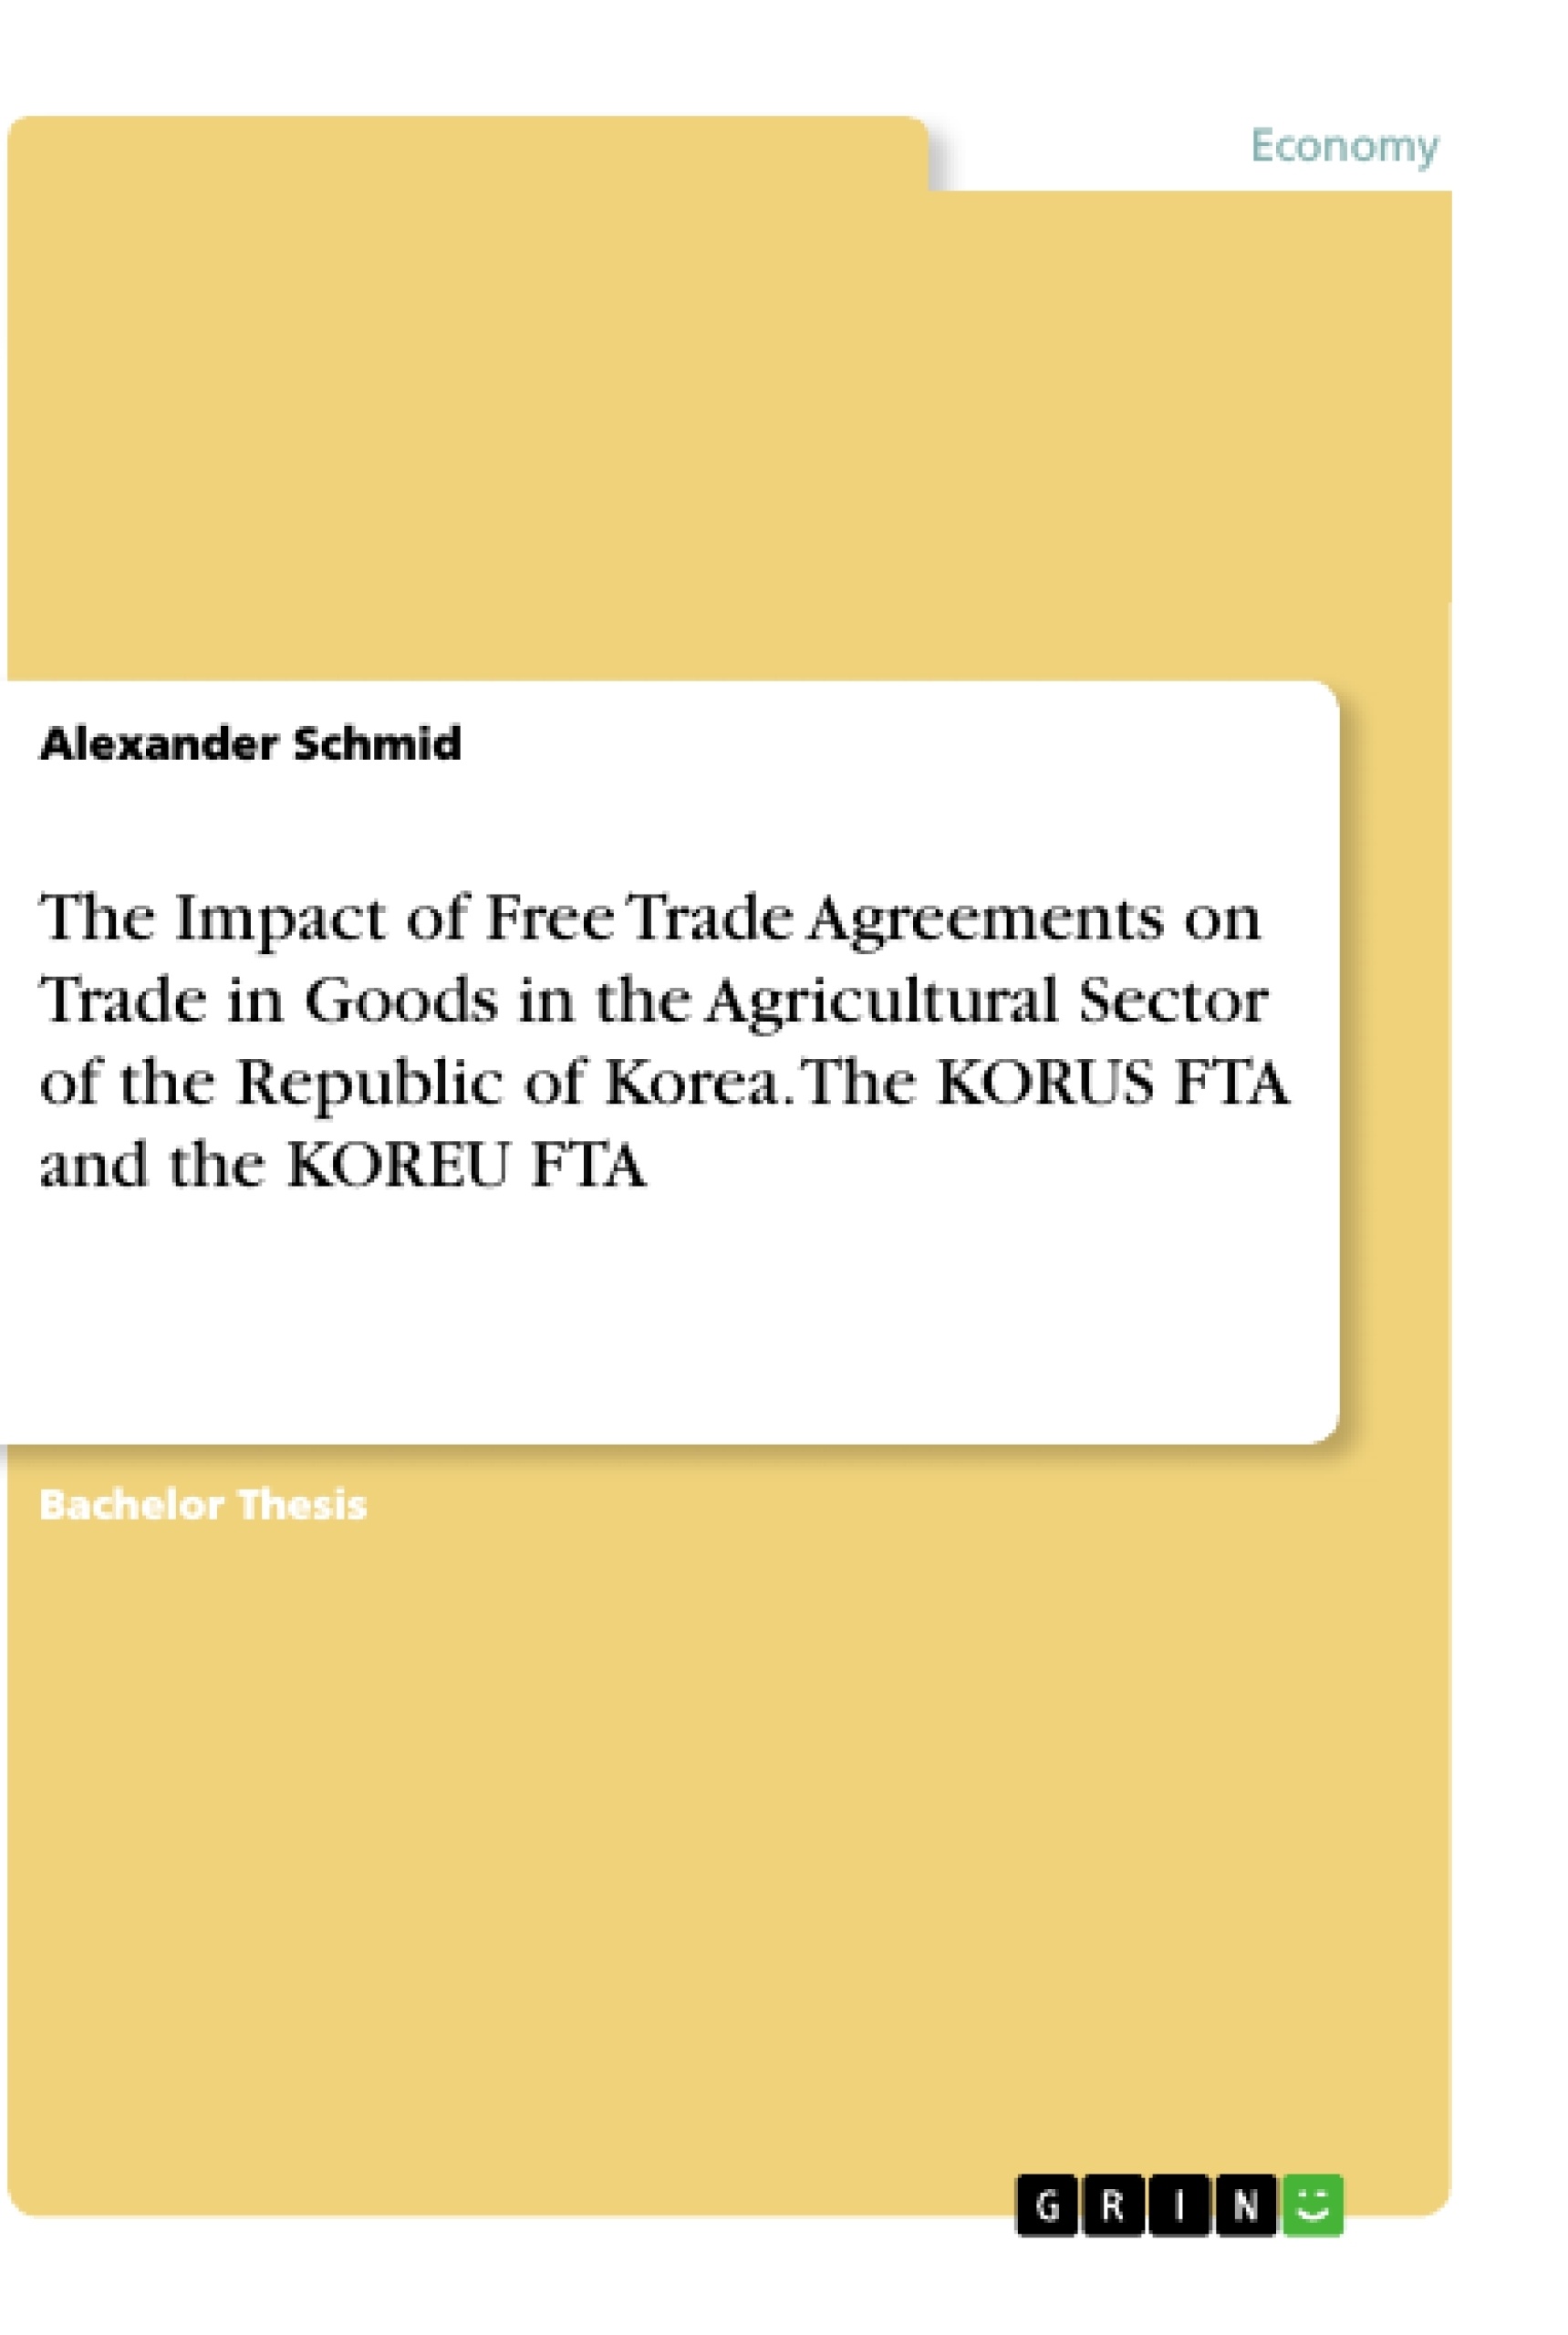 Title: The Impact of Free Trade Agreements on Trade in Goods in the Agricultural Sector of the Republic of Korea. The KORUS  FTA and the KOREU FTA